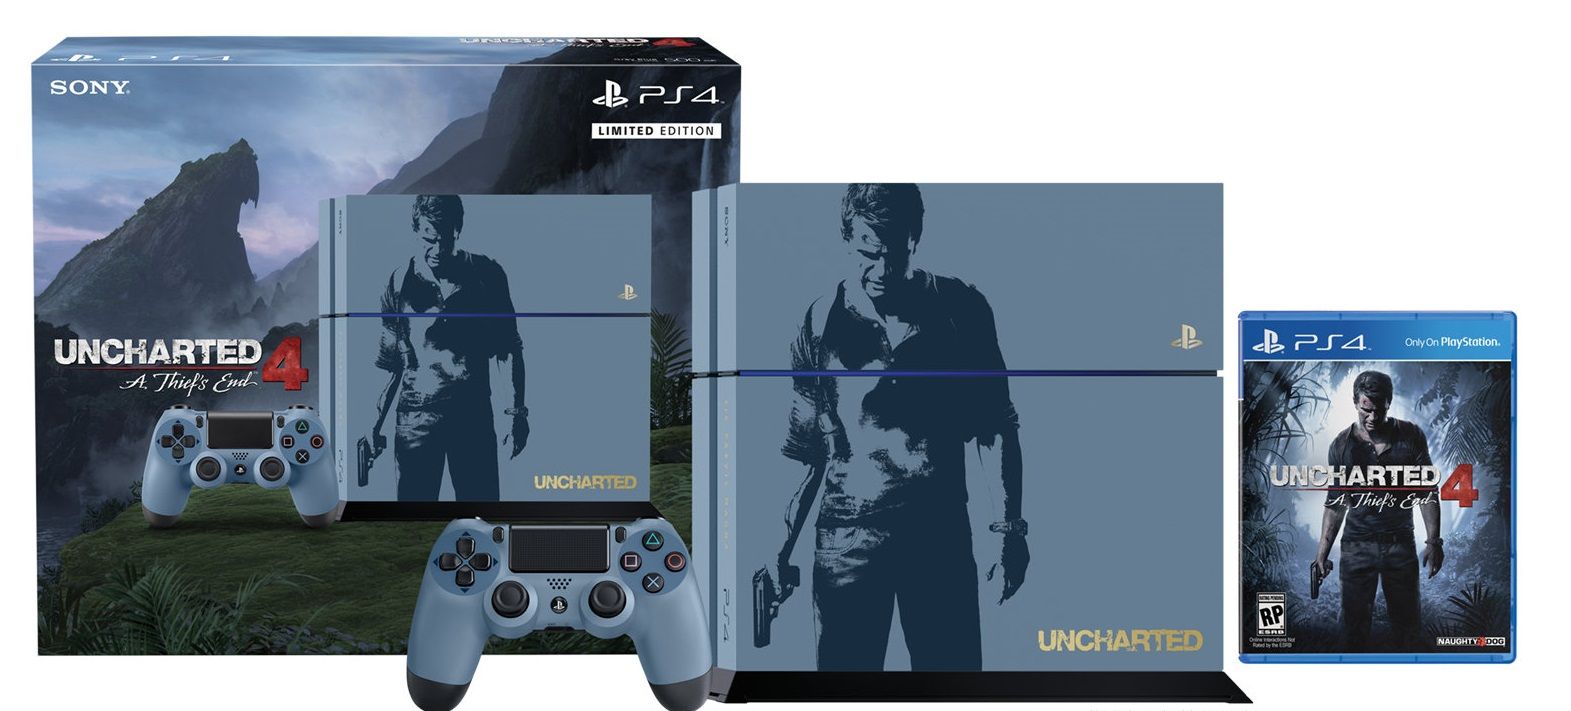 Playstation Uncharted Limited Edition